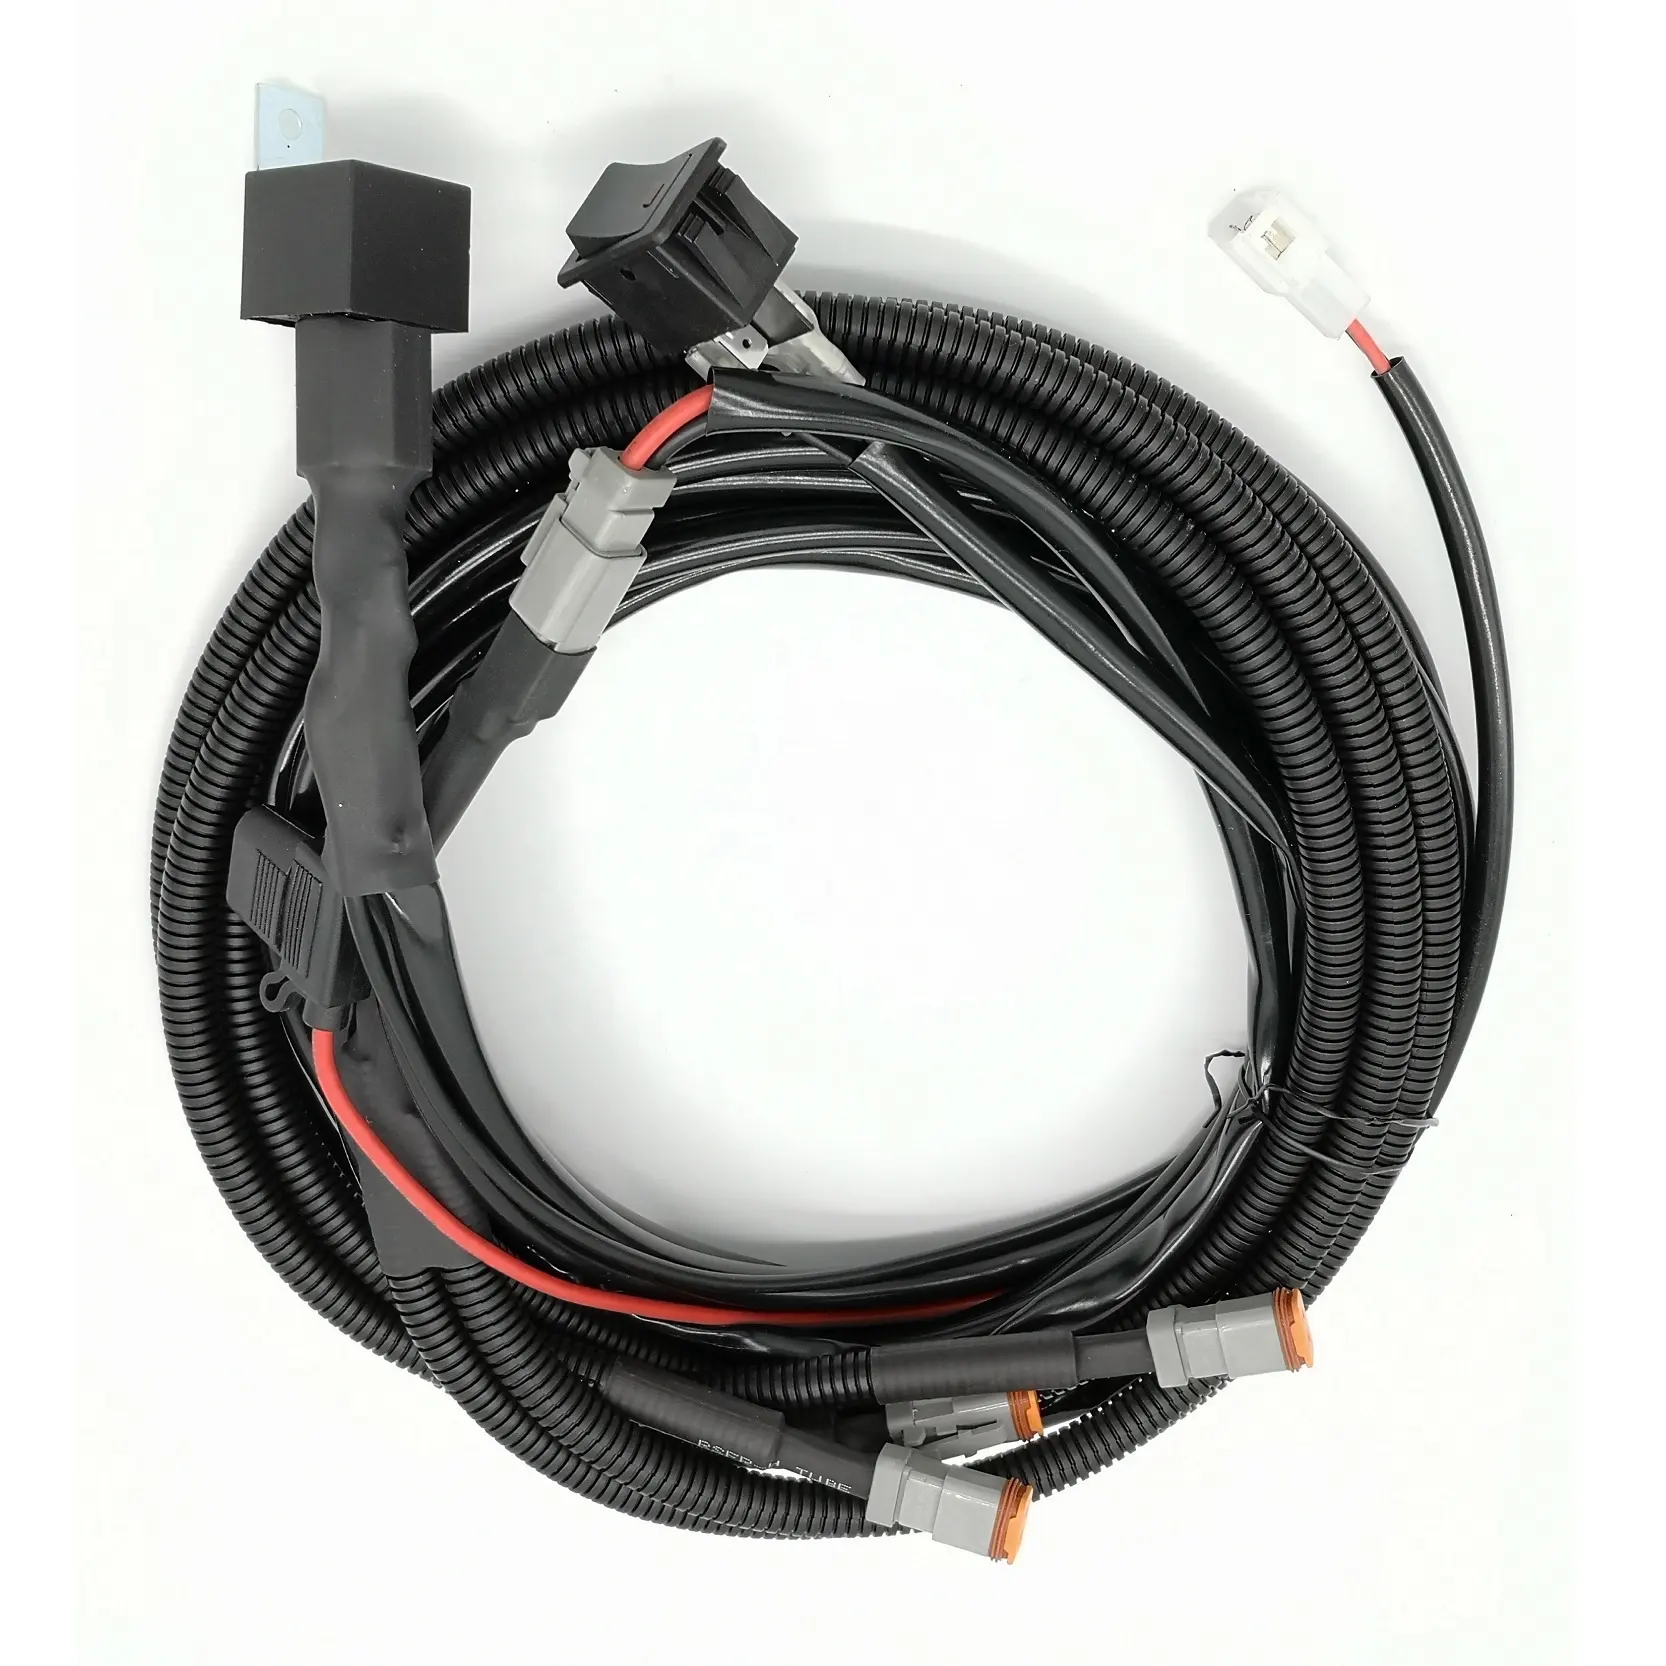 Foshan Chentong Cable Custom Made DT Connector Automotive Hid Headlight Cables Harness